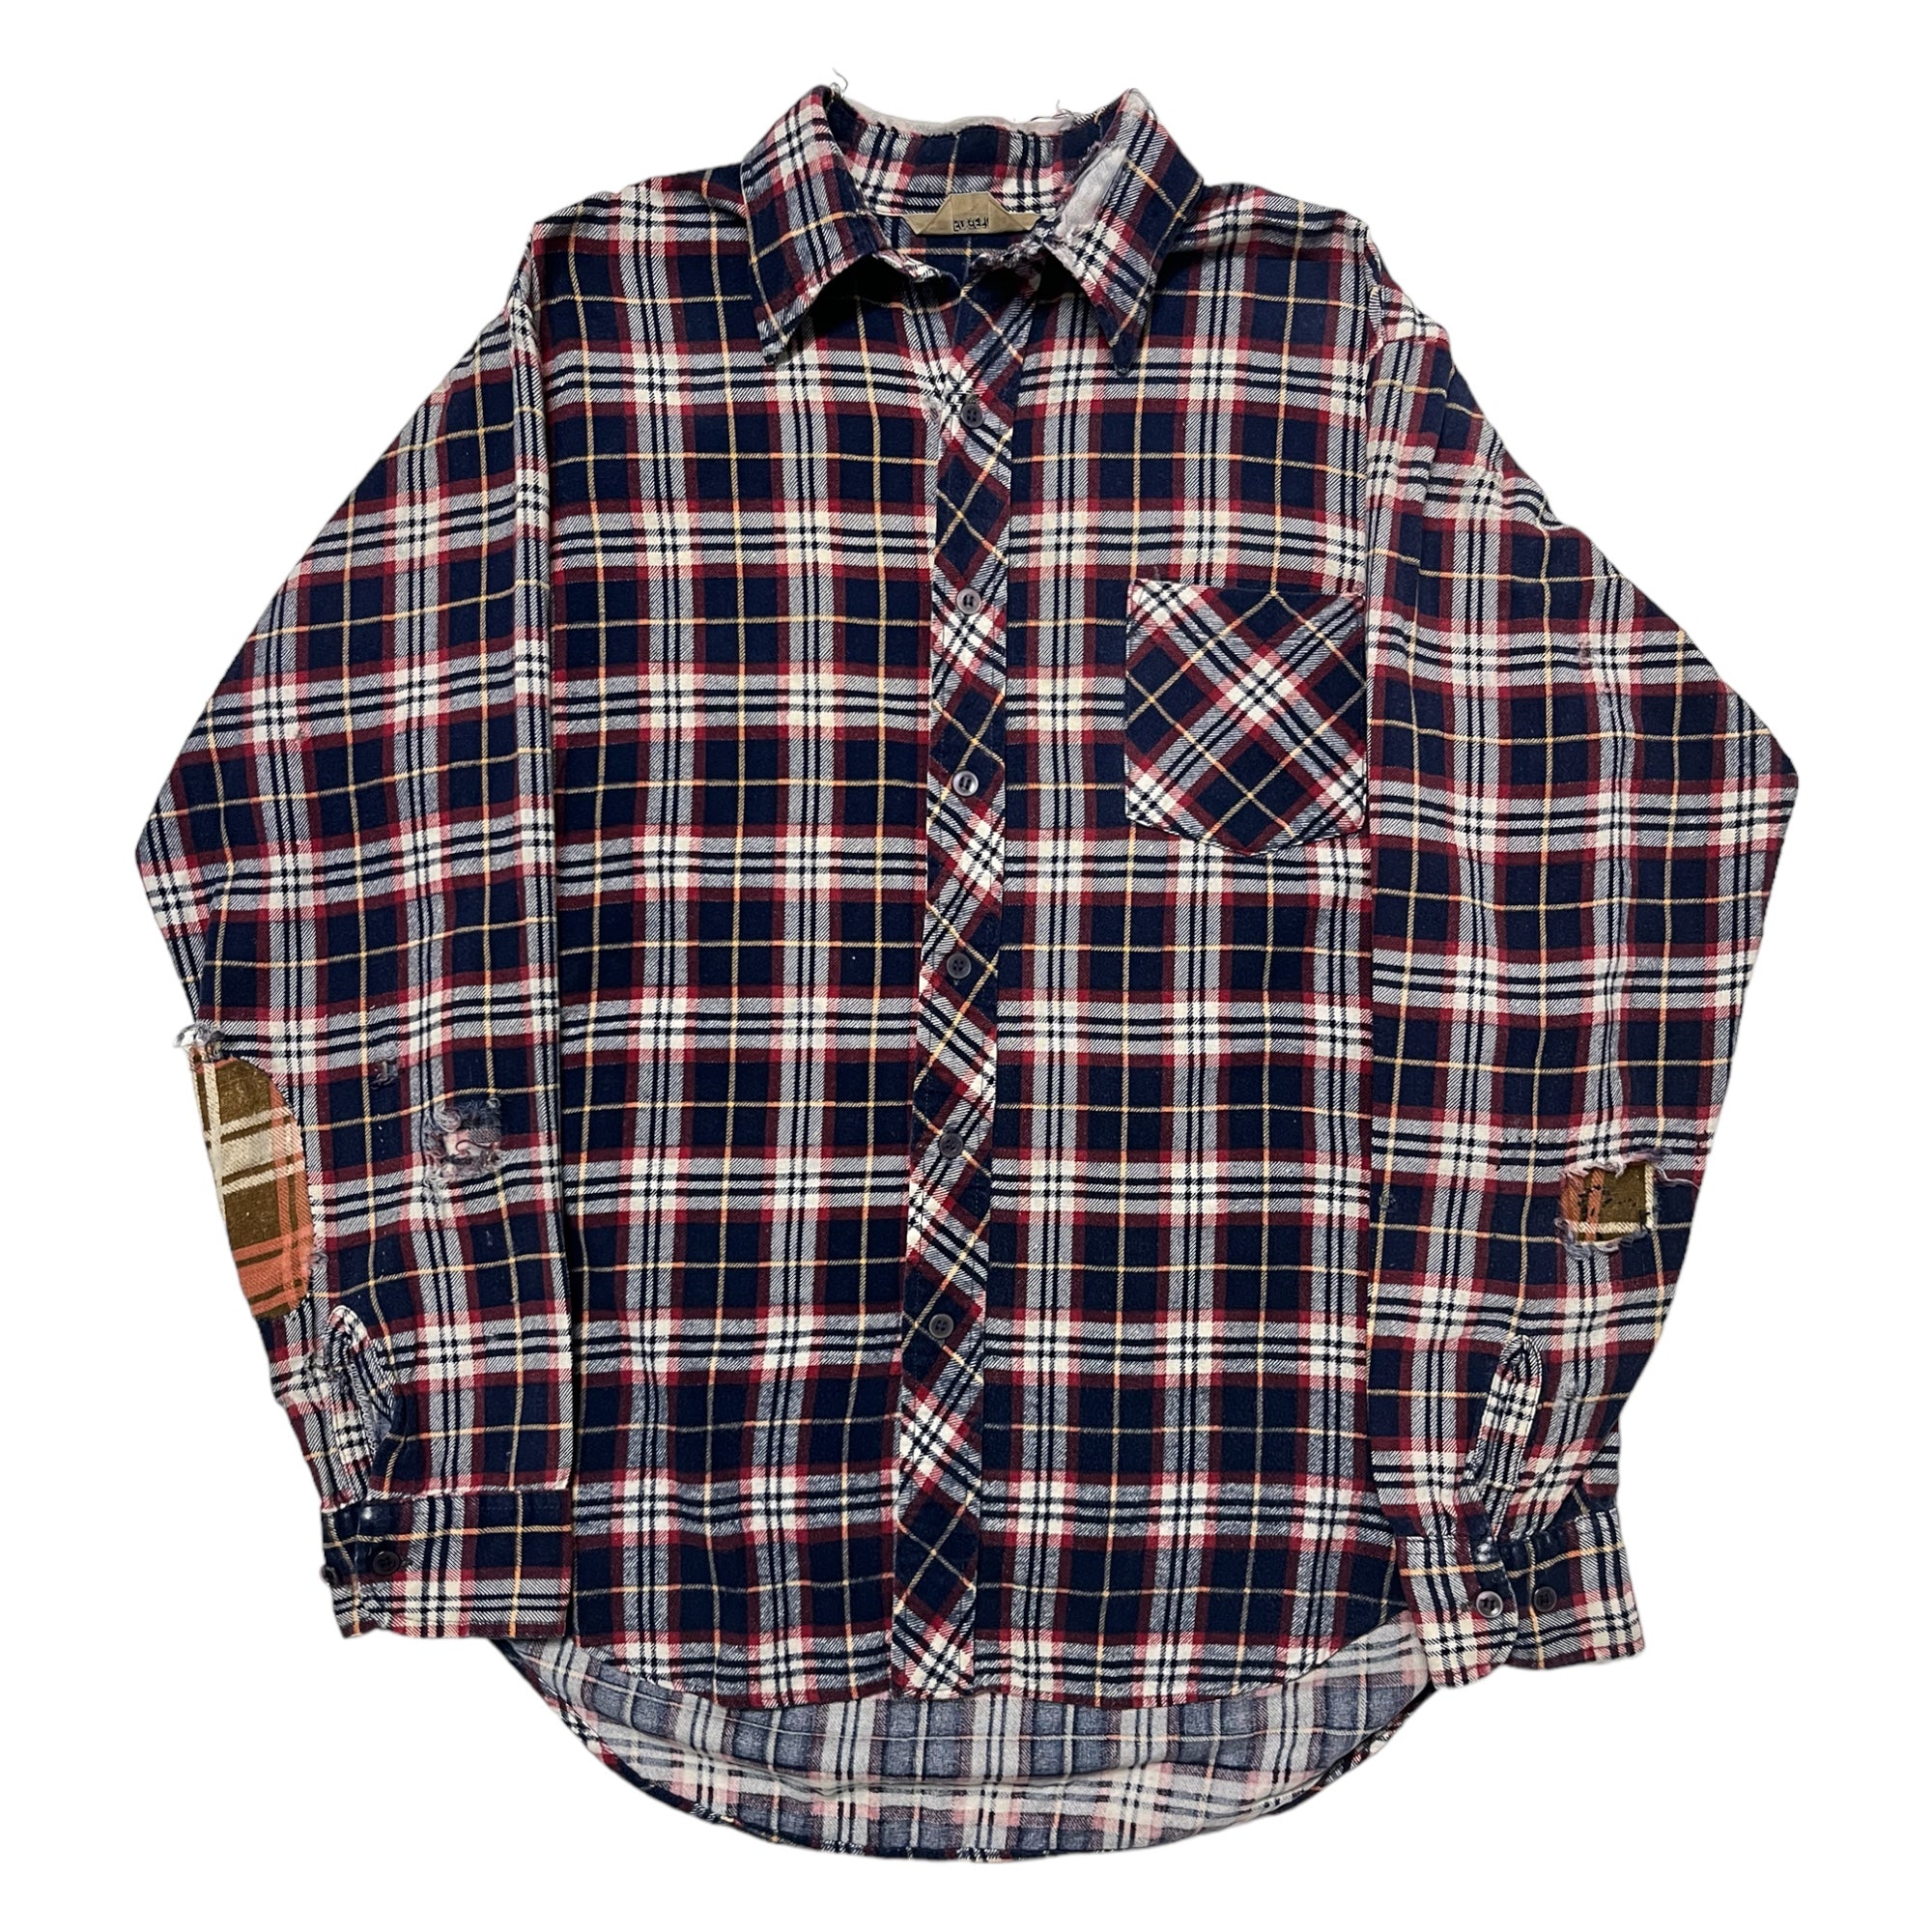 1980s Distressed Flannel with Patches & Repairs - Navy/Red - M/L